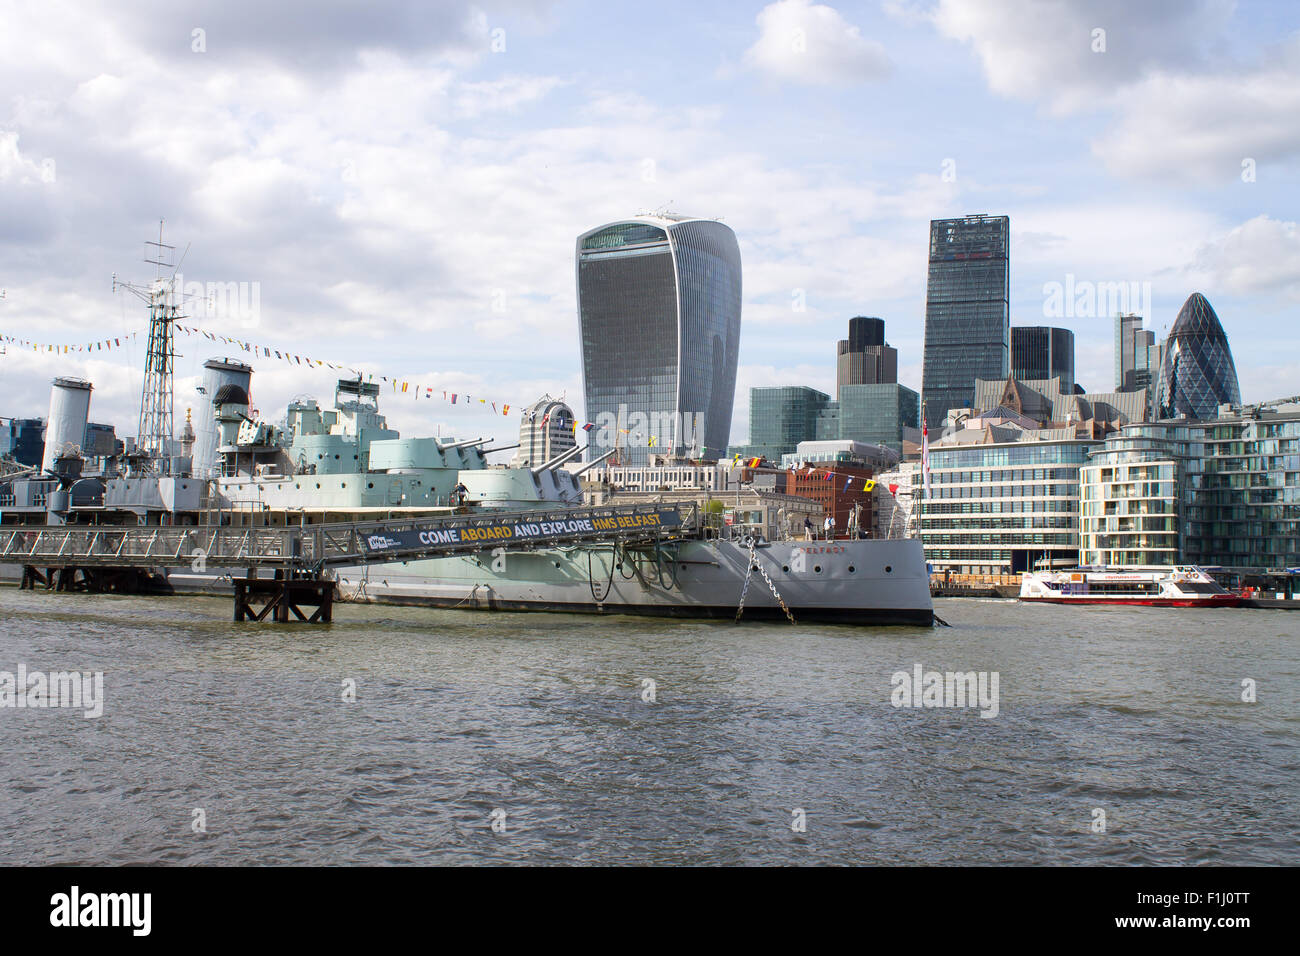 HMS Belfast, famous warship on River Thames. London City on a background. Tourists walking on the deck of the ship. Stock Photo